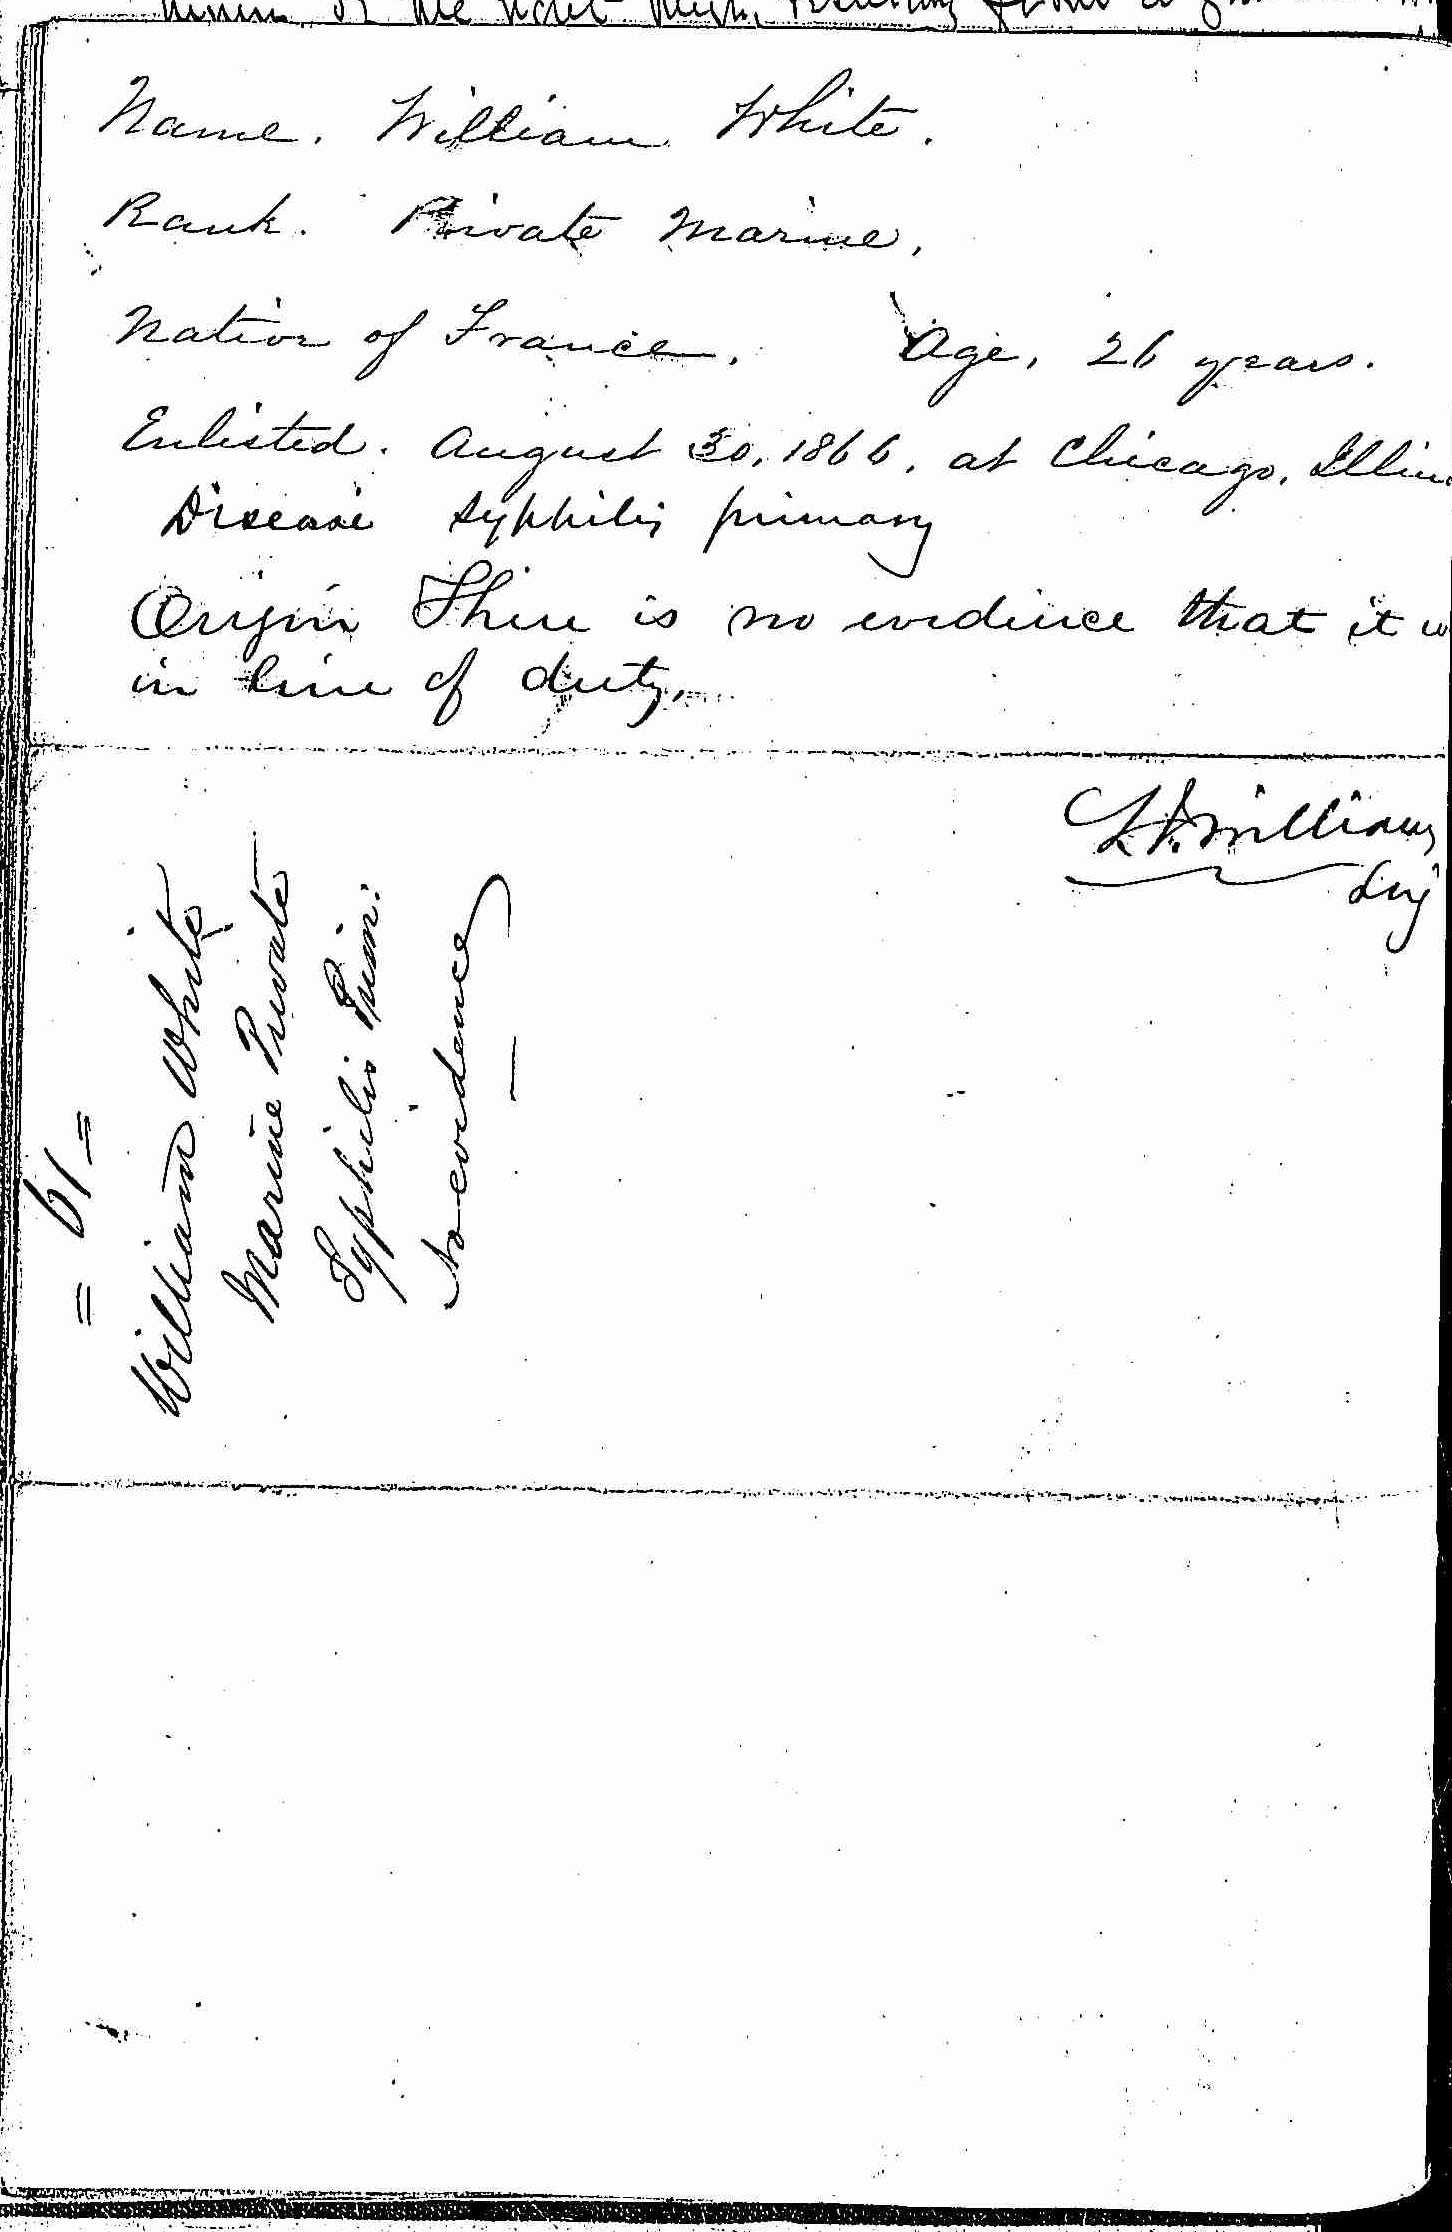 Entry for William White (page 2 of 2) in the log Hospital Tickets and Case Papers - Naval Hospital - Washington, D.C. - 1865-68